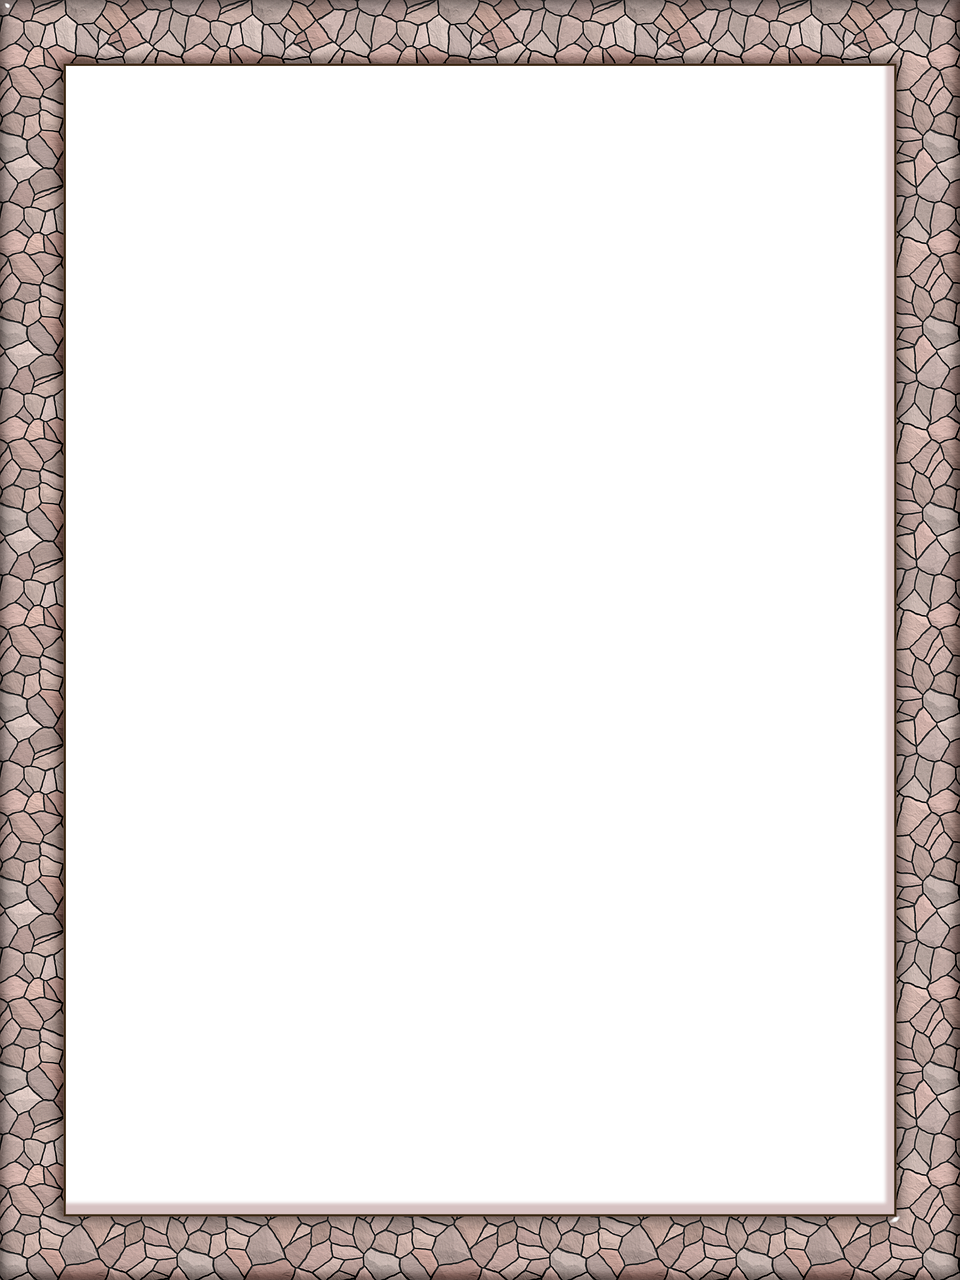 a picture frame with a black background and a red border, a digital rendering, inspired by Tawaraya Sōtatsu, minimalism, mosaic stone floor, wide screenshot, detailed backgrounds, 1128x191 resolution